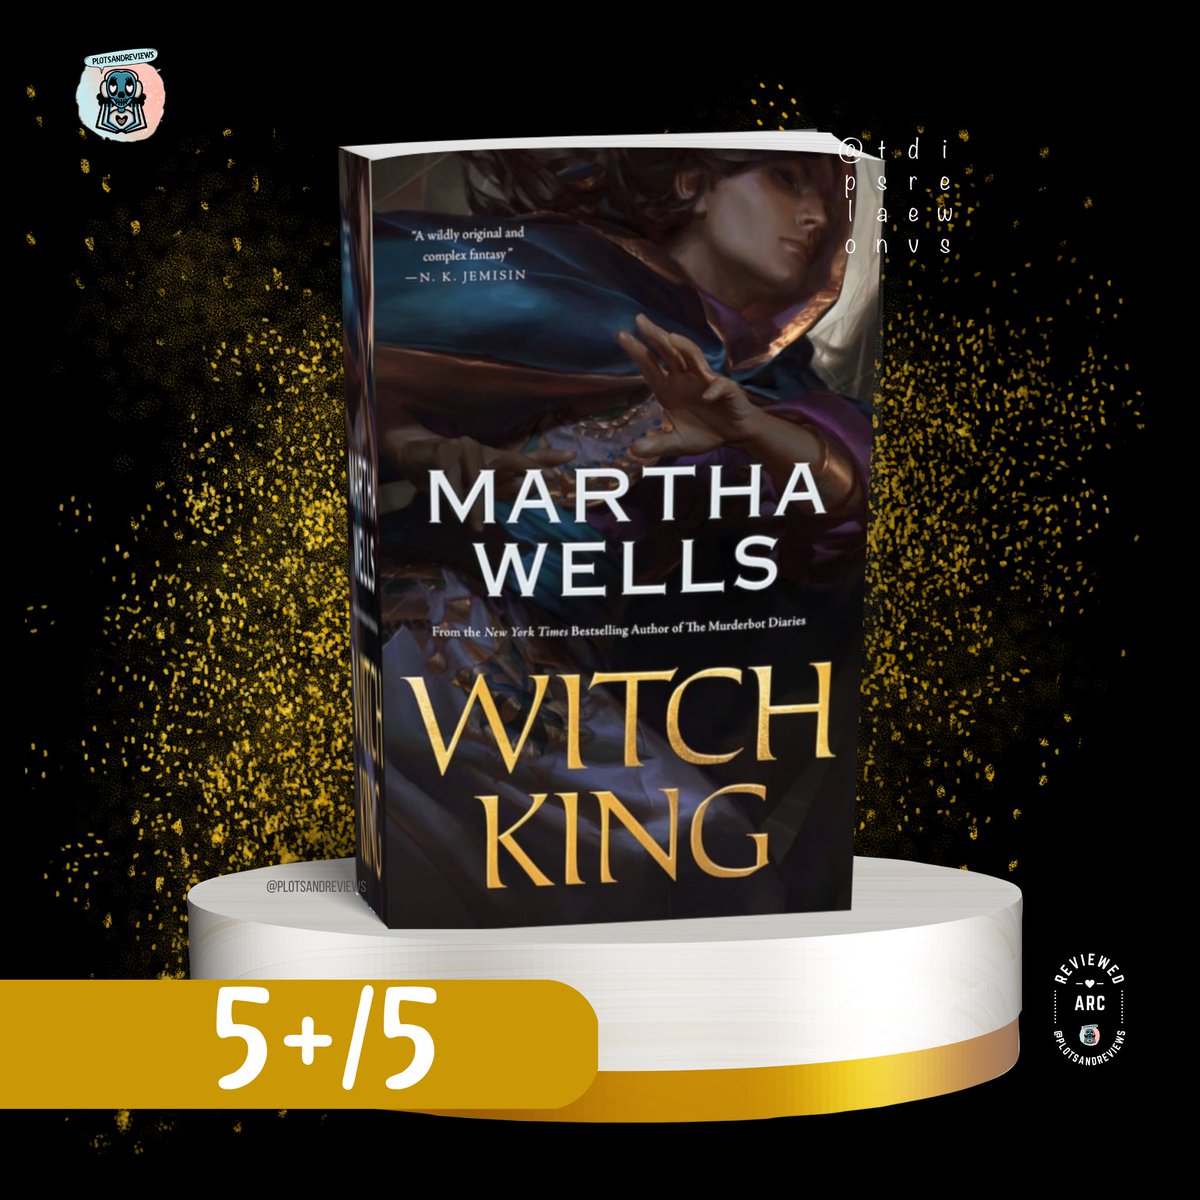 I LOVED IT, I loved it more than I possibly could have thought! 

Thank you for the ARC #torbooks #marthawells